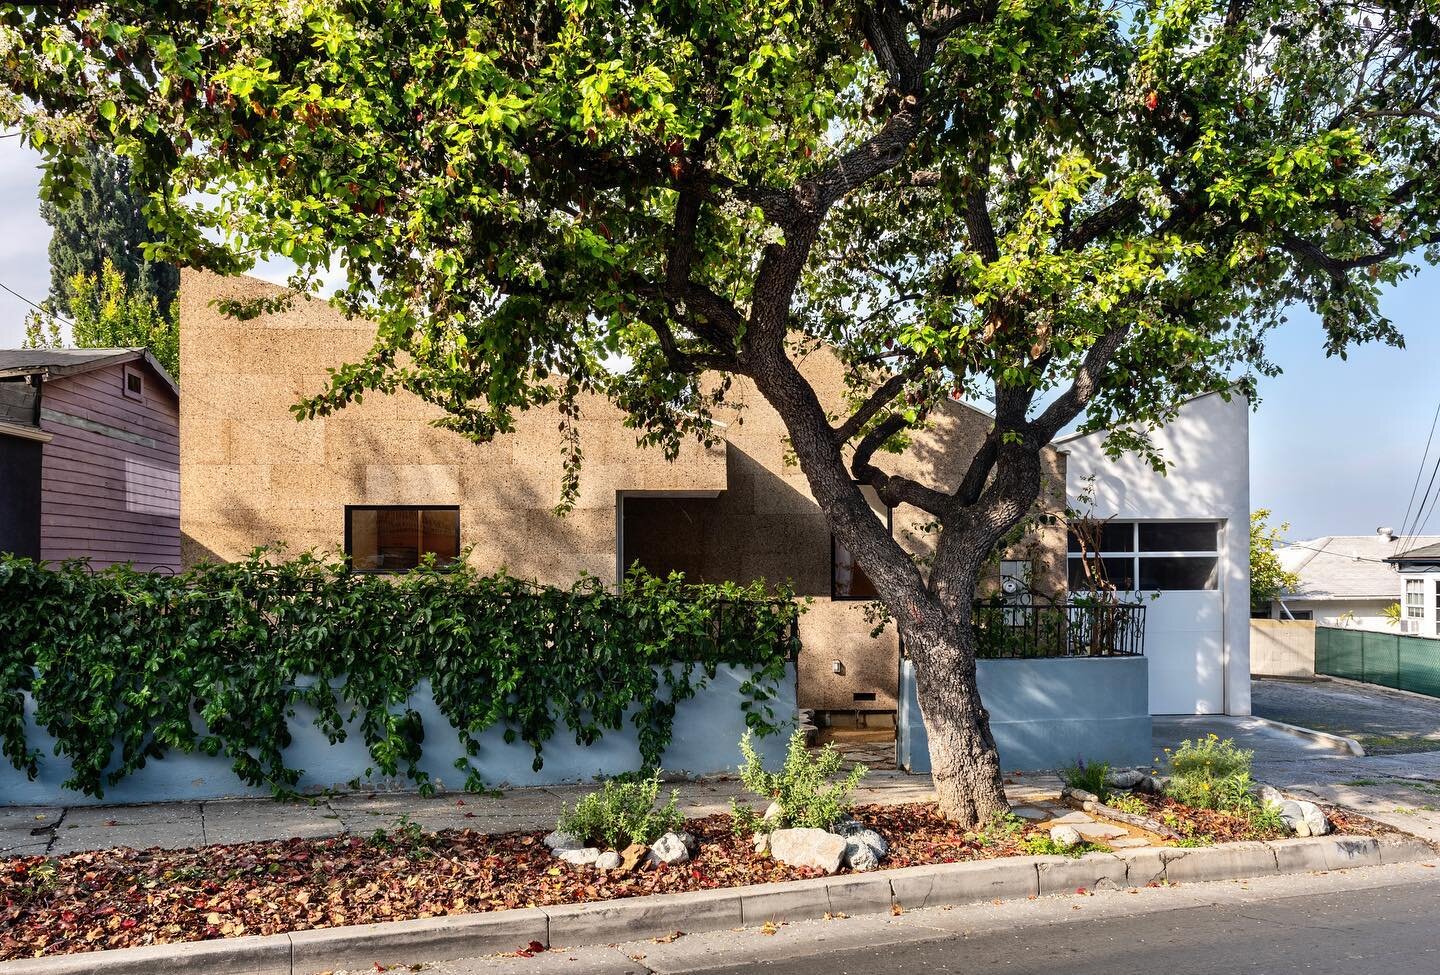 Introducing our small project on Isabel Street - a case study in climate-responsive design and natural building materials on an infill site in Cypress Park/Mt. Washington.
...
Climate-responsive design, aka passive design, uses seasonal sun, wind, an